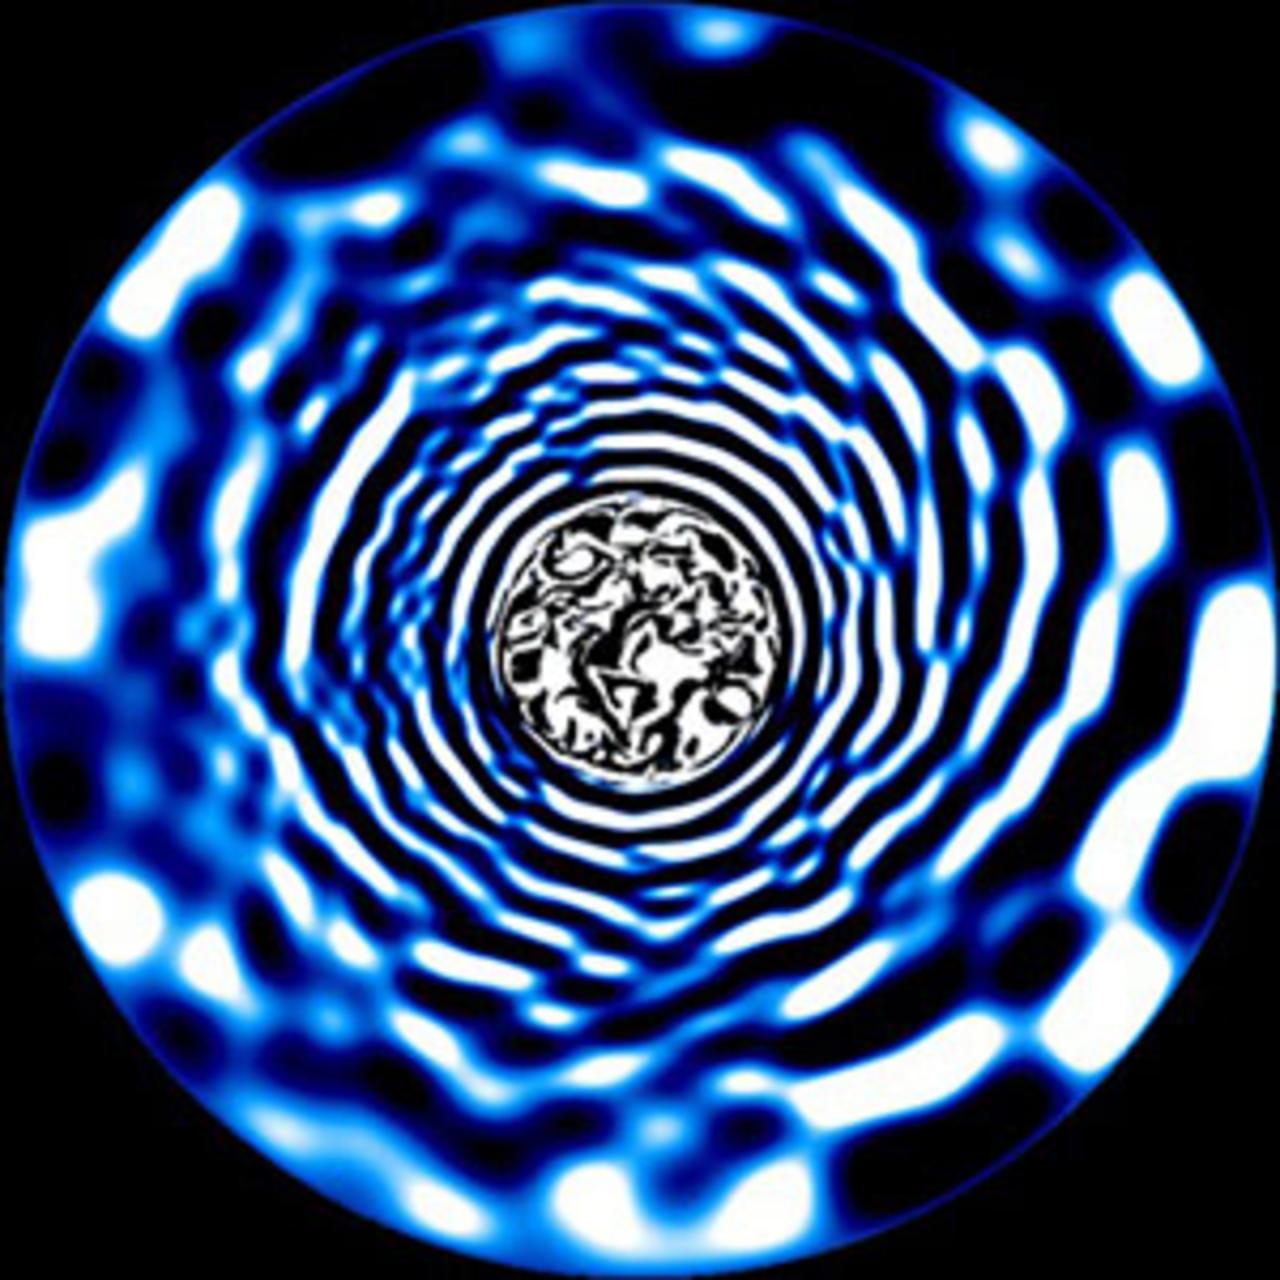 A snapshot from a hydrodynamical simulation of the interior of a star three times as heavy as our Sun, which shows waves generated by turbulent core convection and propagating throughout the star's interior. Credit: Tamara Rogers.